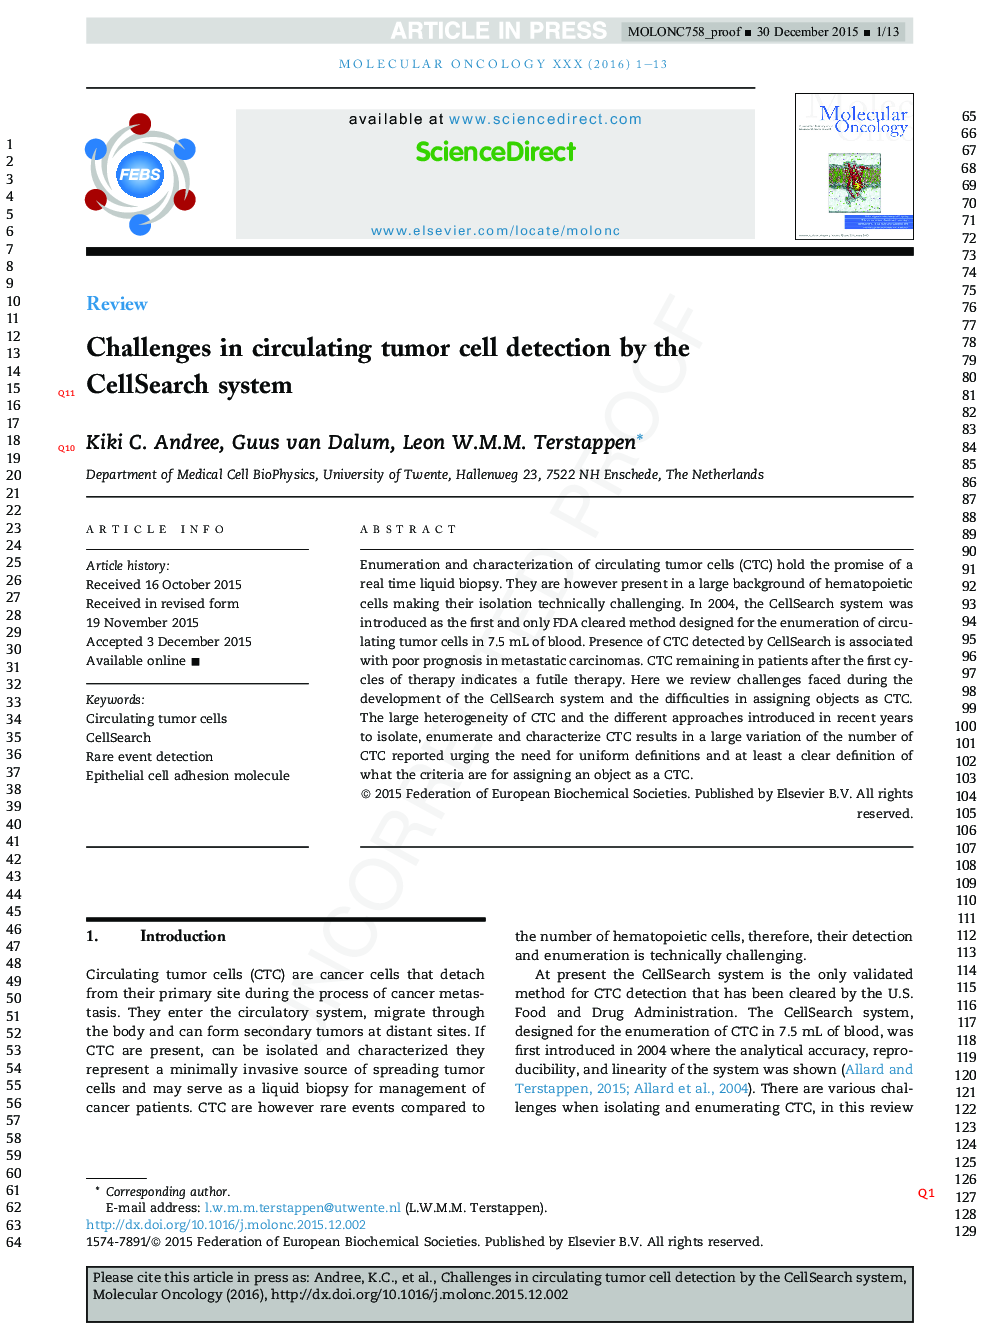 Challenges in circulating tumor cell detection by the CellSearch system